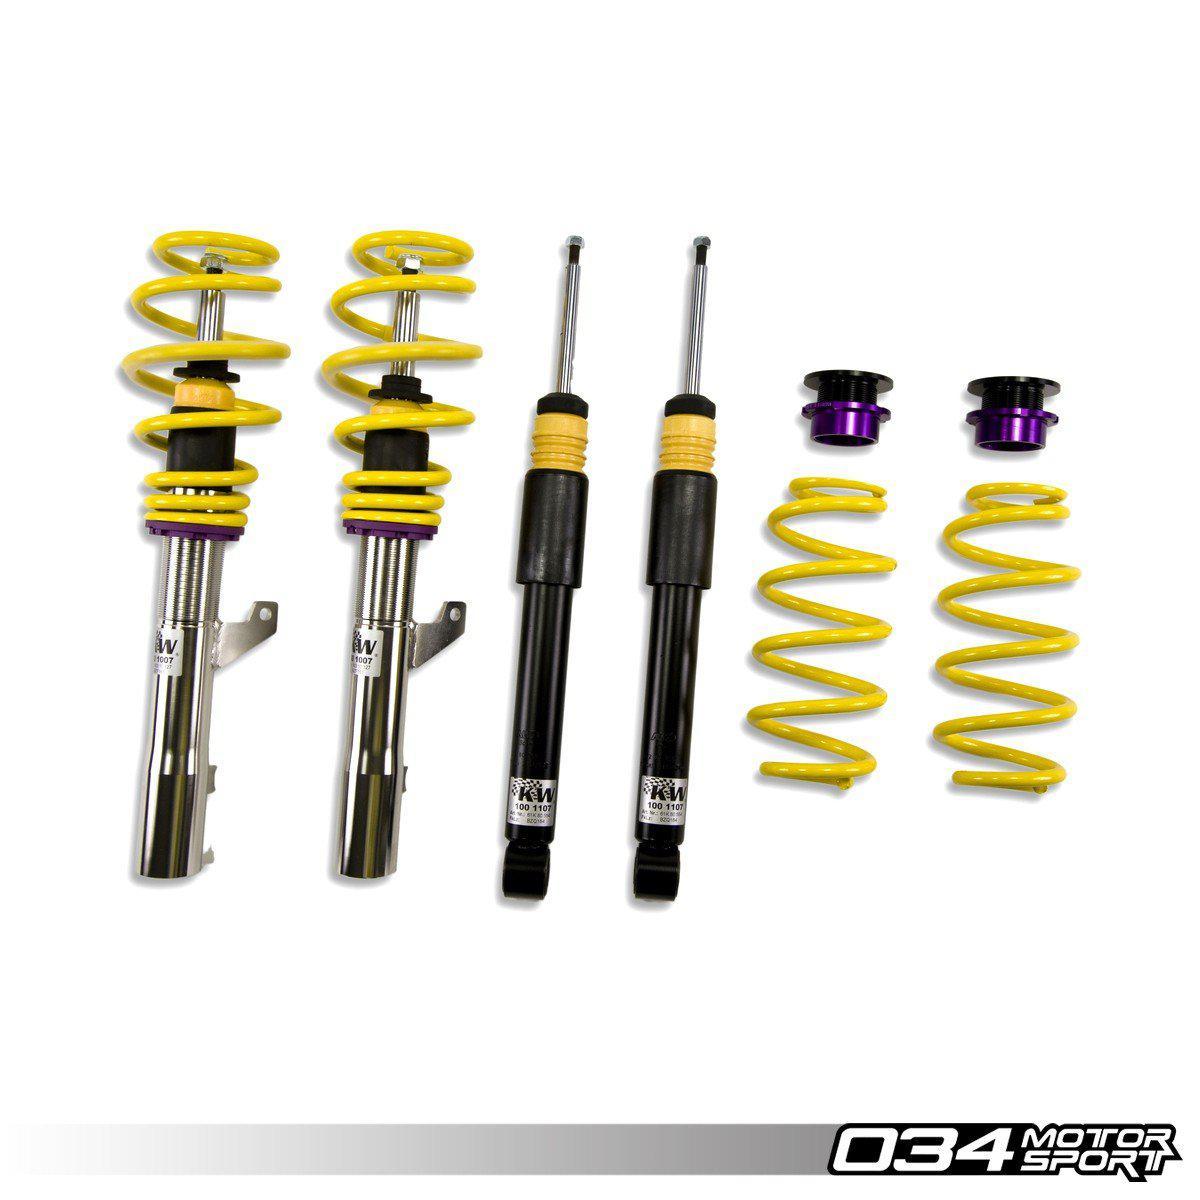 KW Variant 2 Coilover Suspension, MKVI Volkswagen Golf R W/ Dcc-A Little Tuning Co